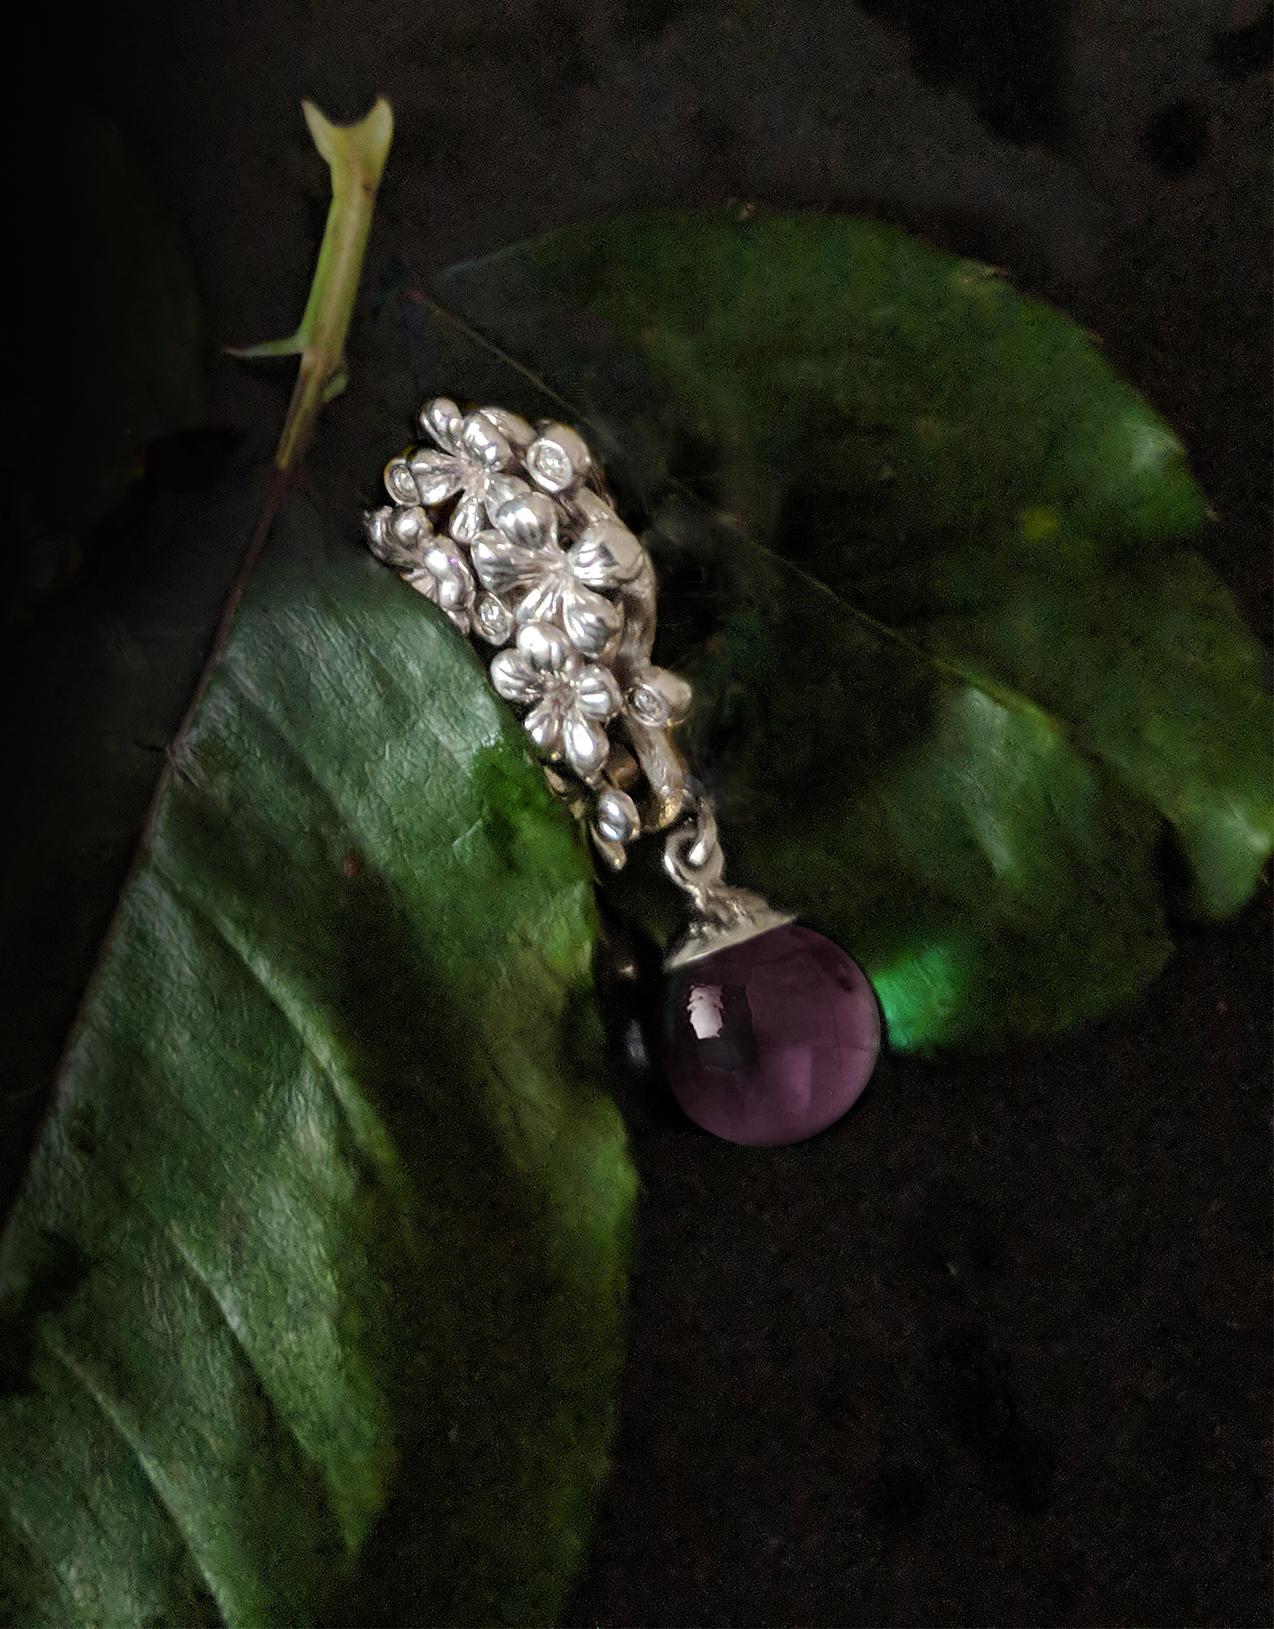 The 14 karat white gold Plum Blossom brooch is encrusted with five round diamonds and a cabochon rose quartz drop, and has been featured in a review by Vogue UA. We use only top-quality natural diamonds of VS clarity and F-G color, sourced from a